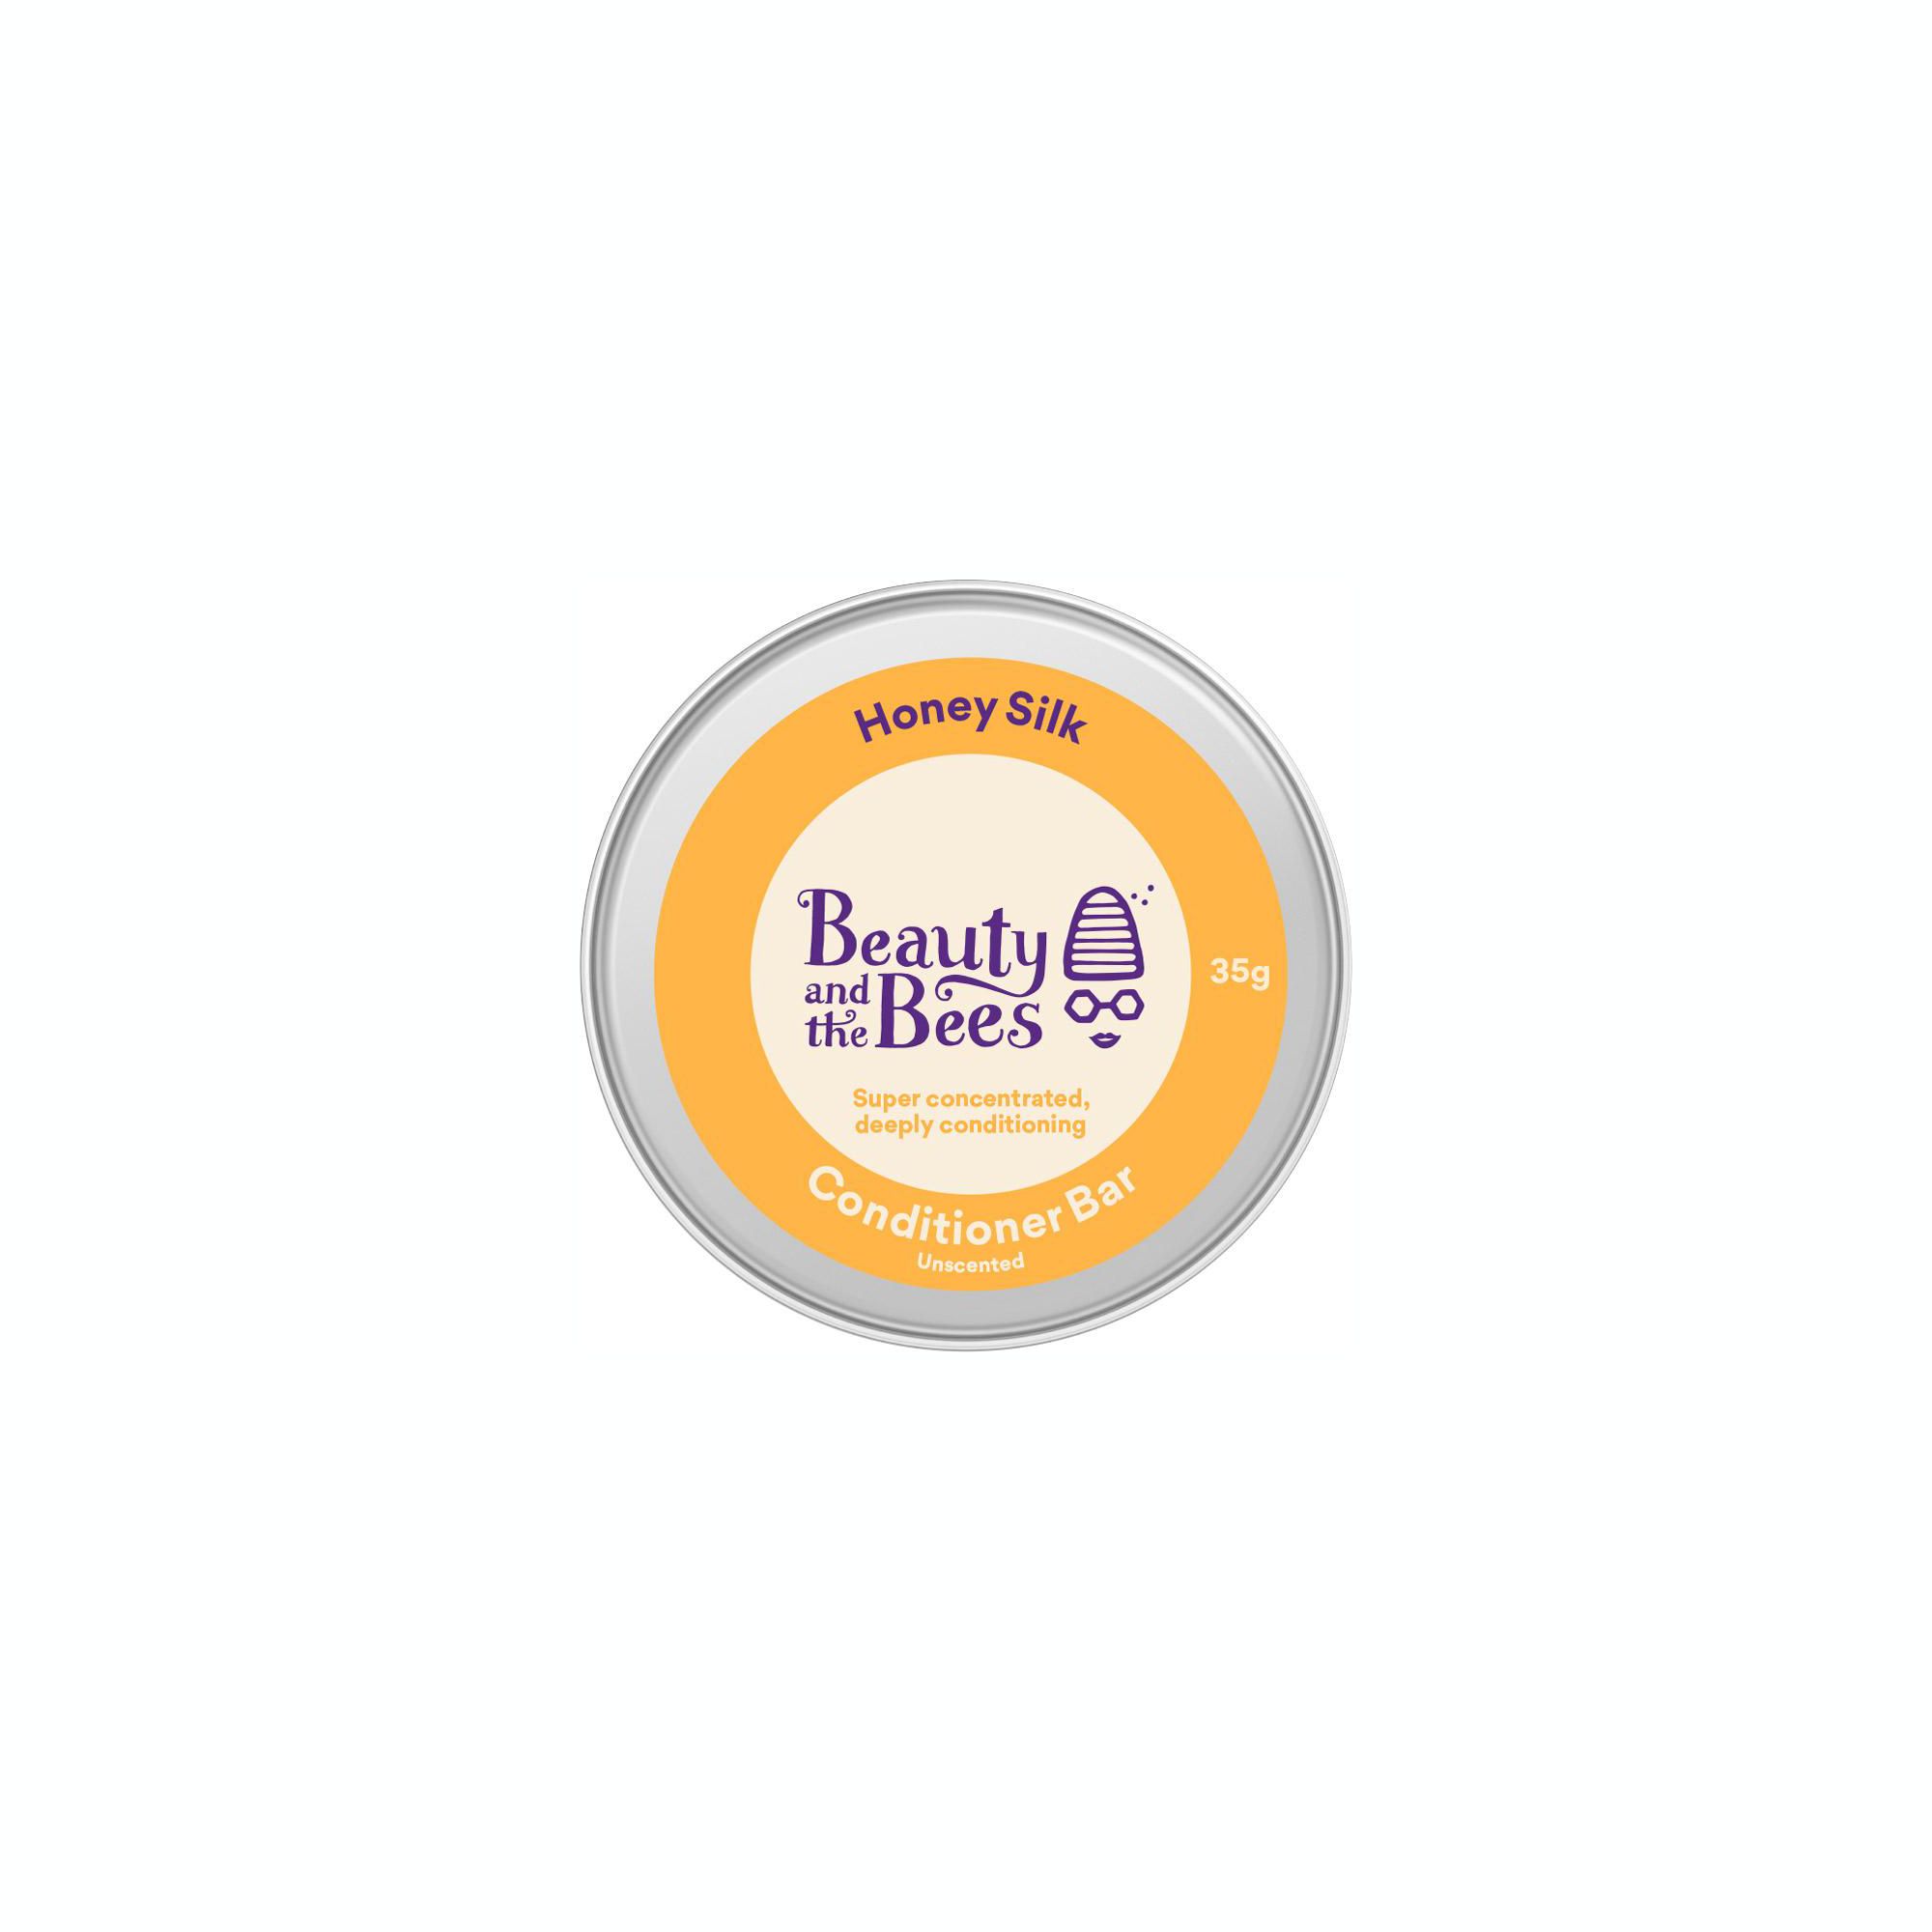 Honey Silk Solid Conditioner Bar for Shiny Healthy Hair | Untangles and Softens Hair | Eco Friendly Hair Care by Beauty and the Bees